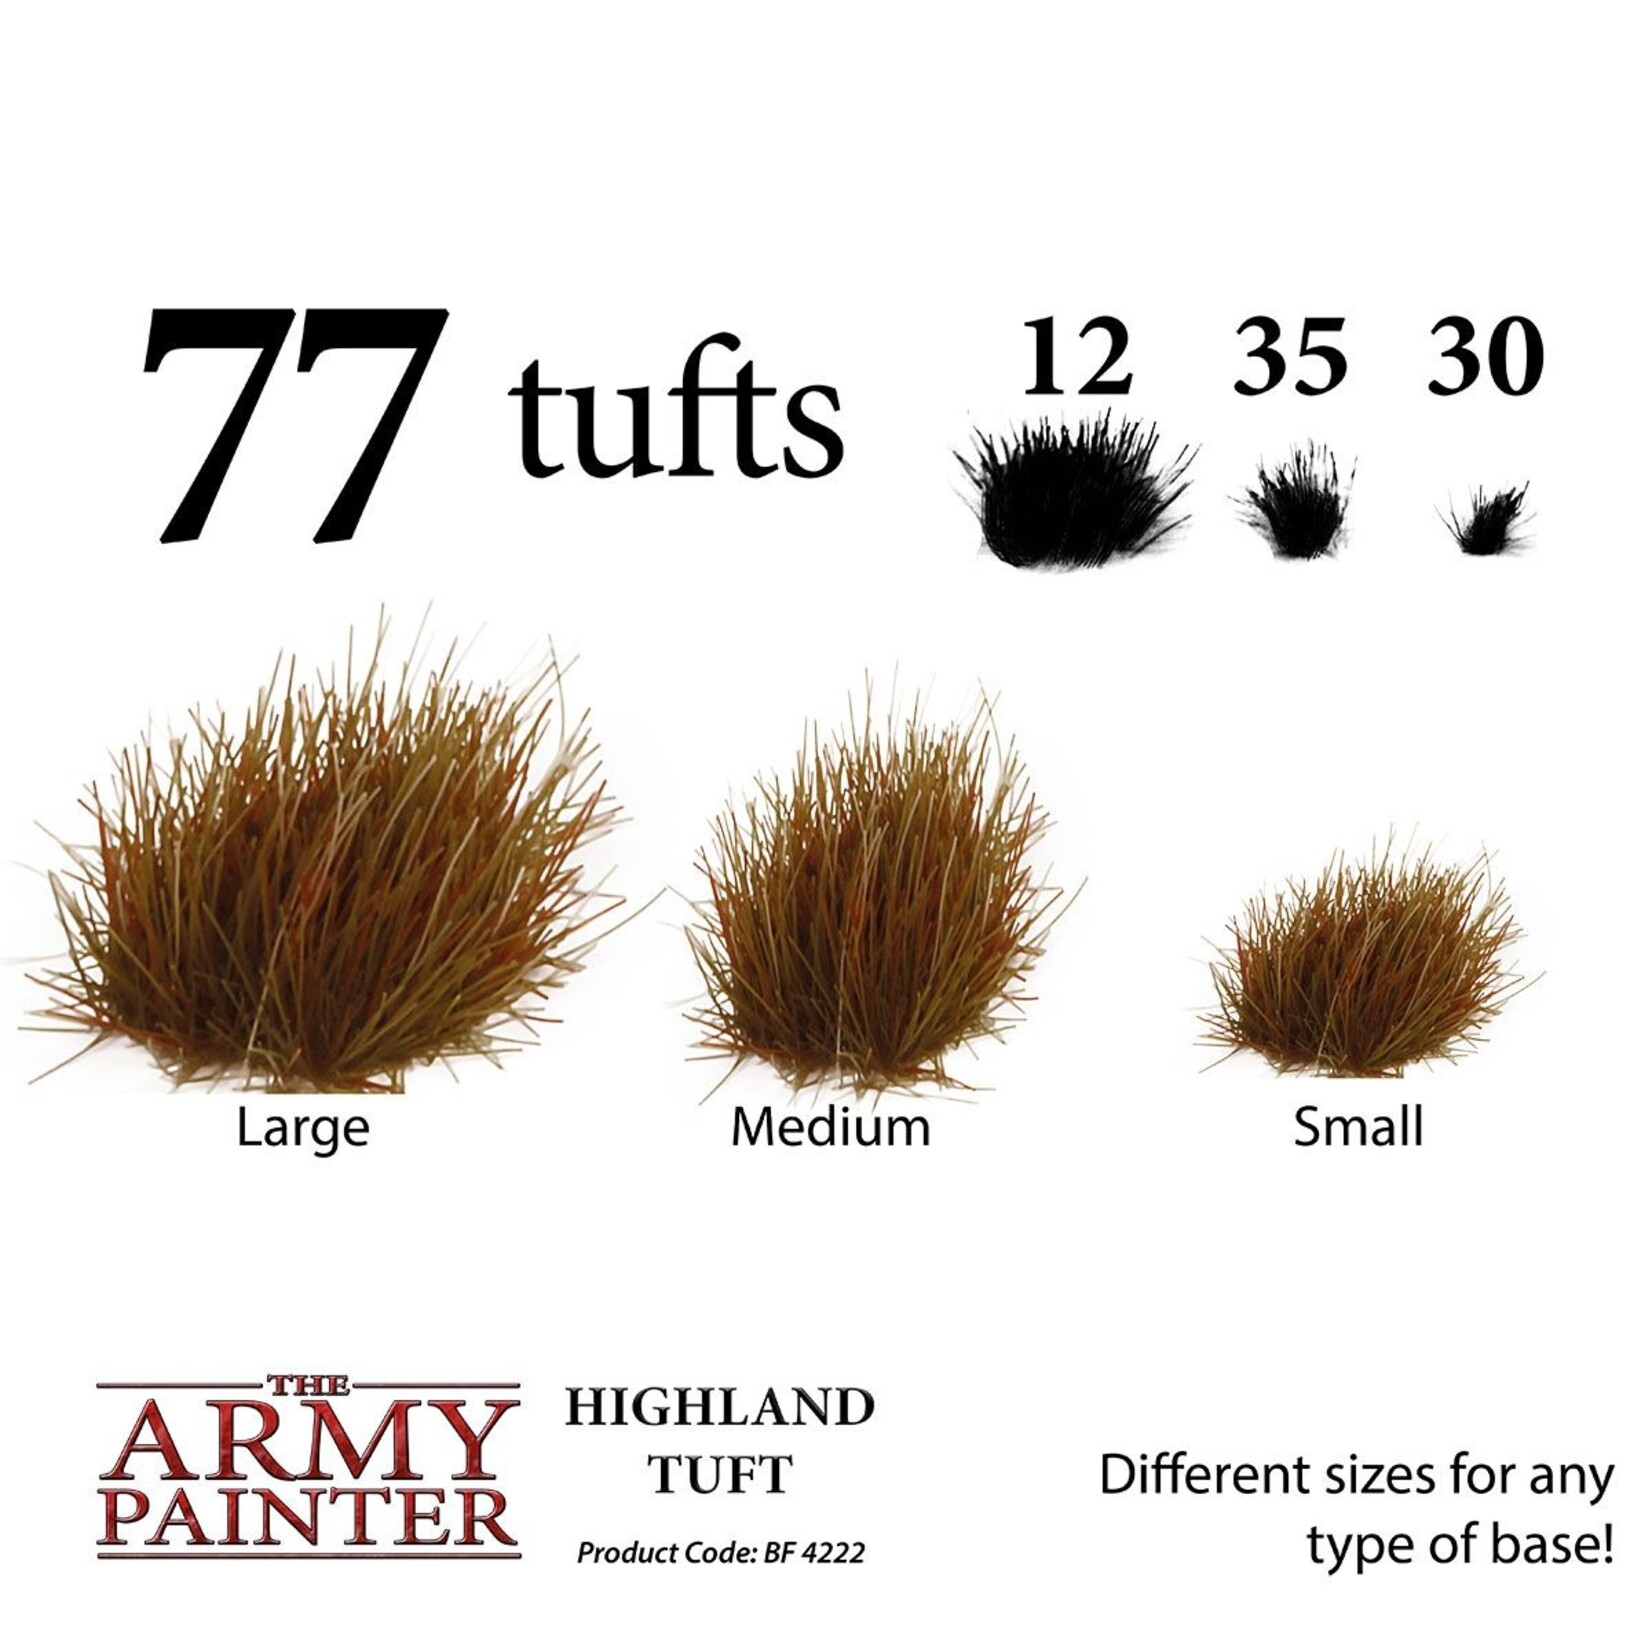 the army painter The Army Painter: 77 Tufts - Highland tuft